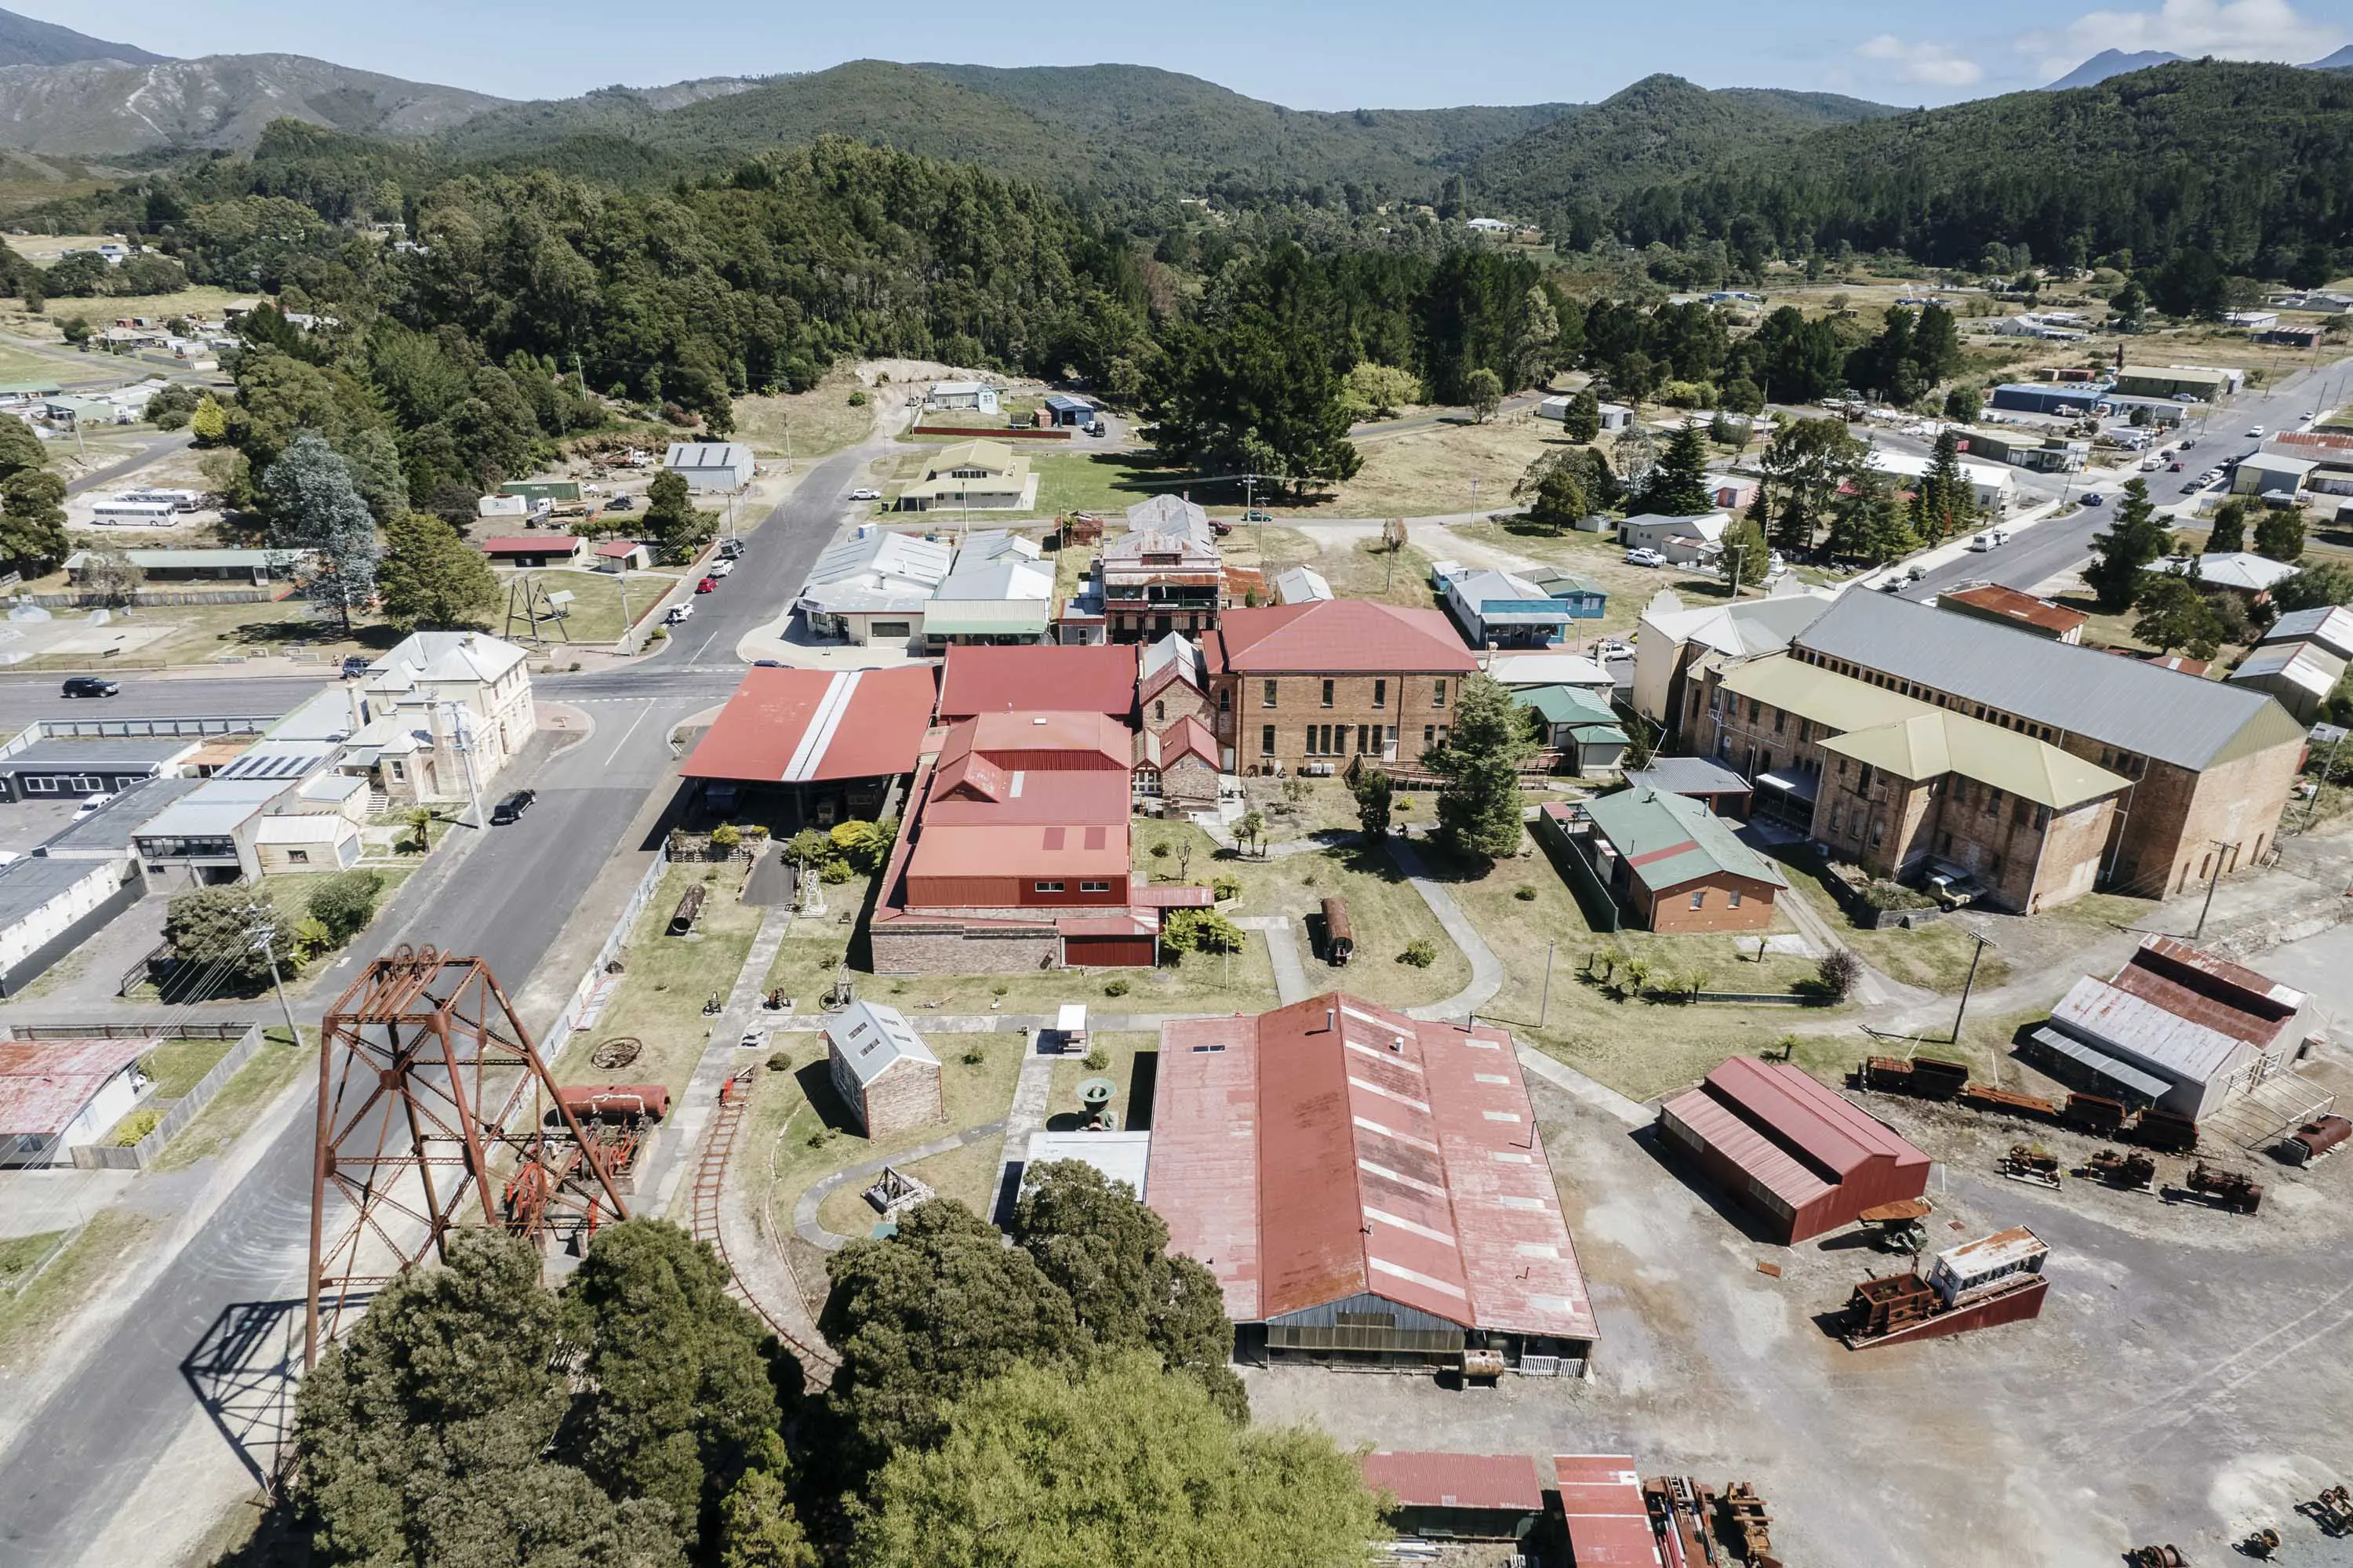 An aerial photograph of a mining town set amongst low lying mountains, with large red tin roof buildings of various shapes and sizes.